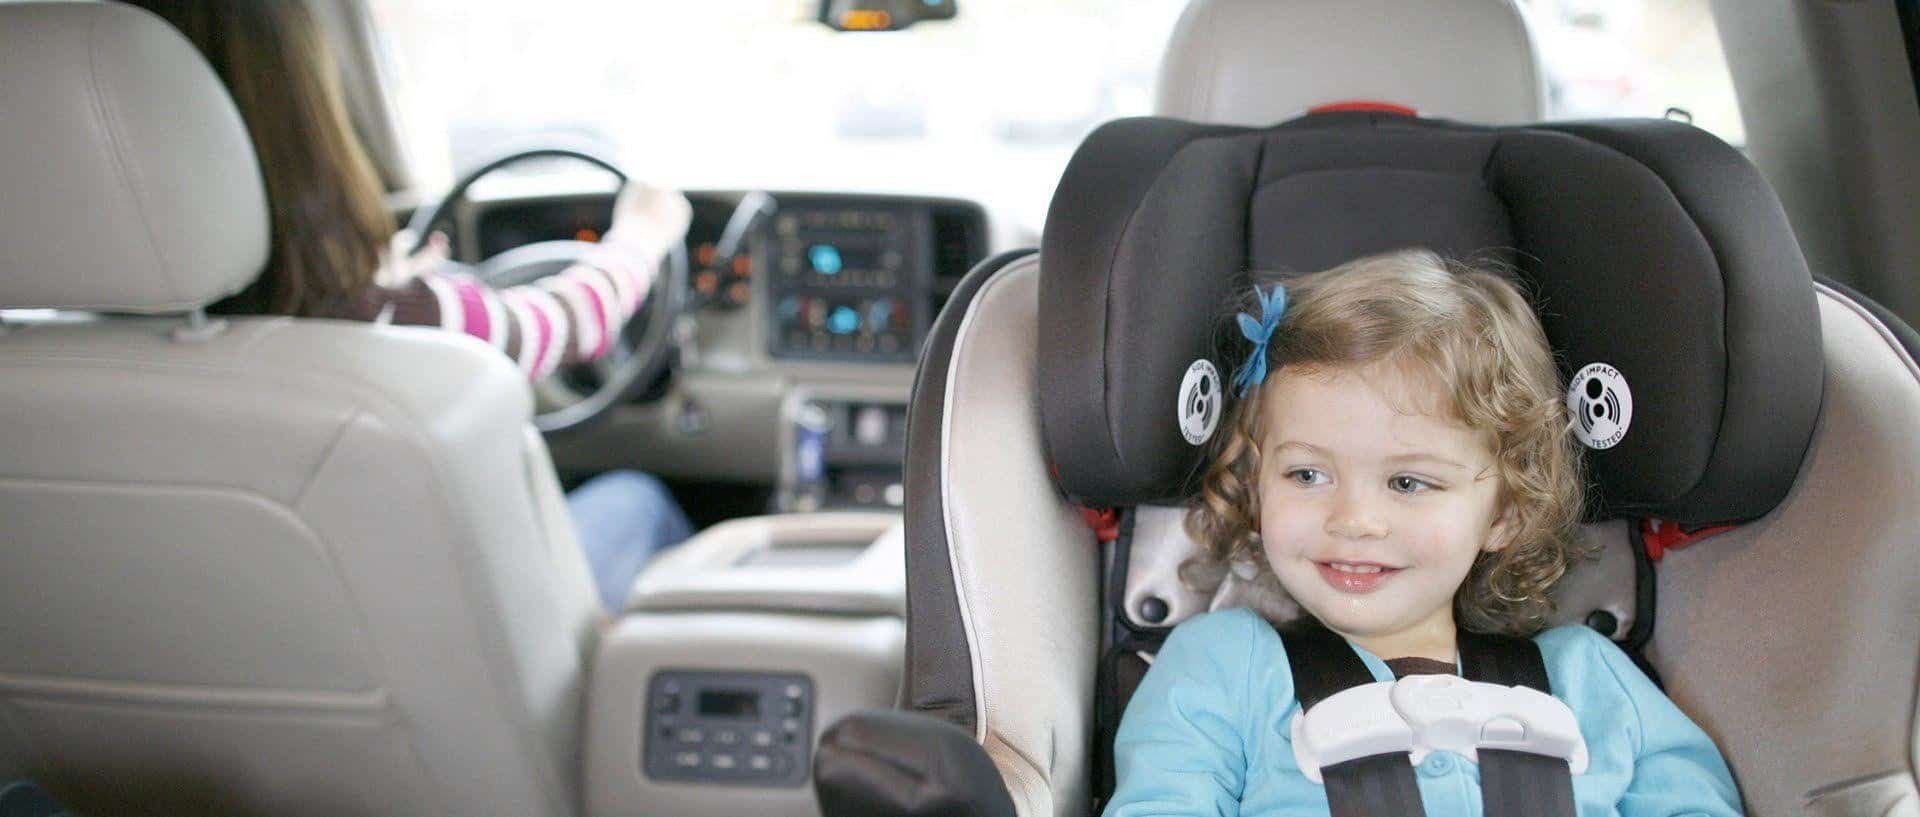 Car Seat 101 - Car Seat Types Explained